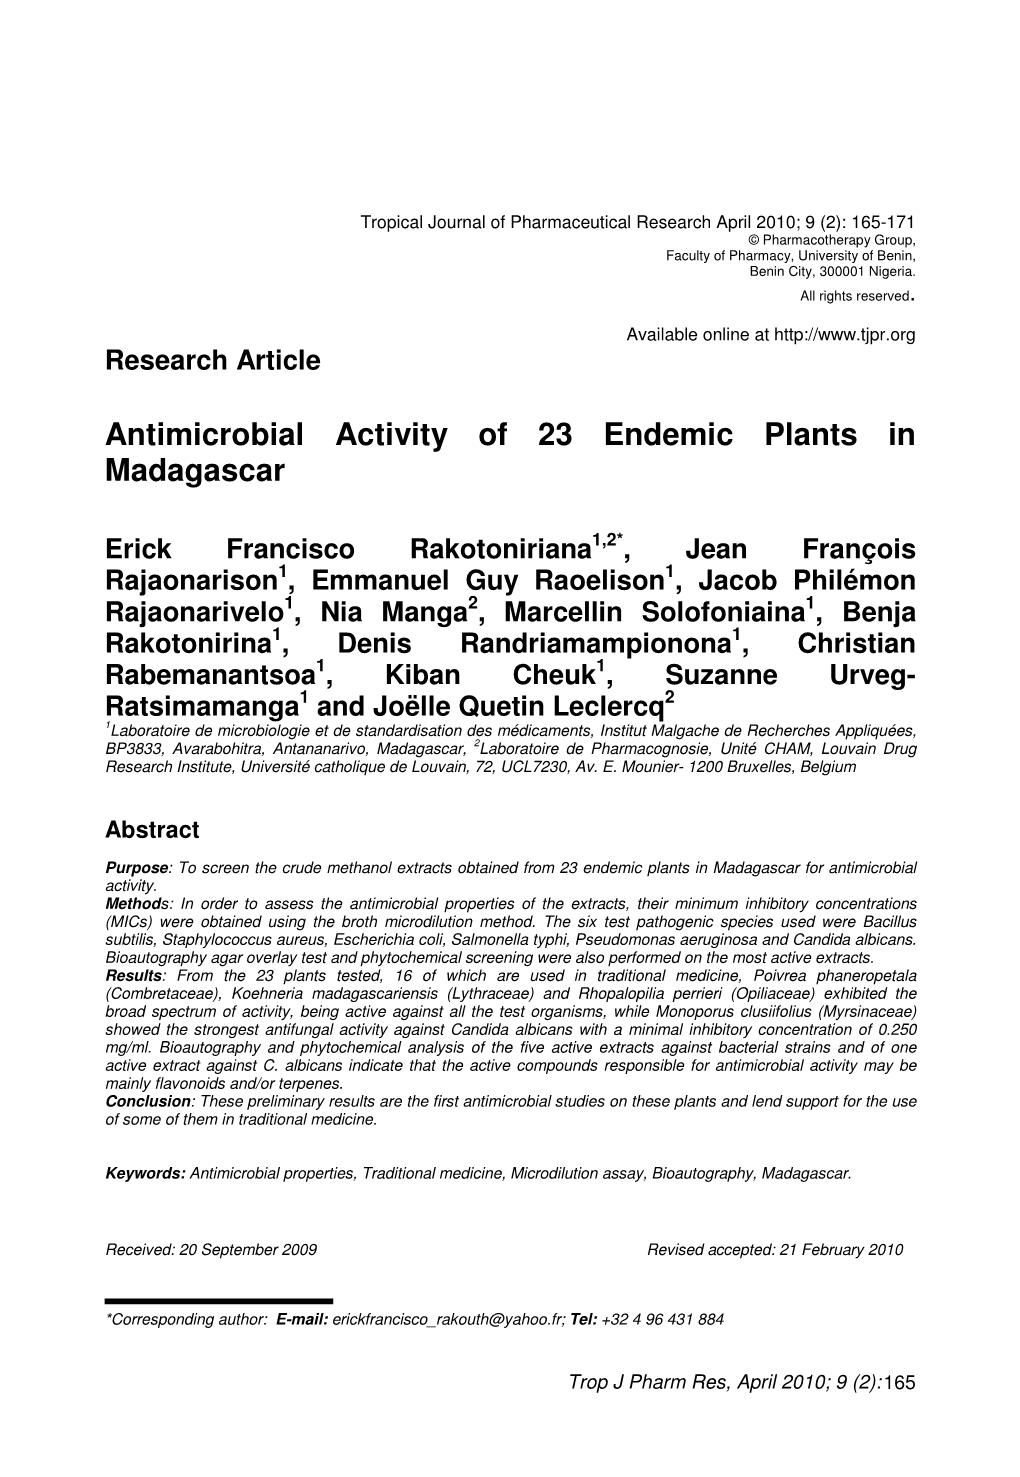 Antimicrobial Activity of 23 Endemic Plants in Madagascar